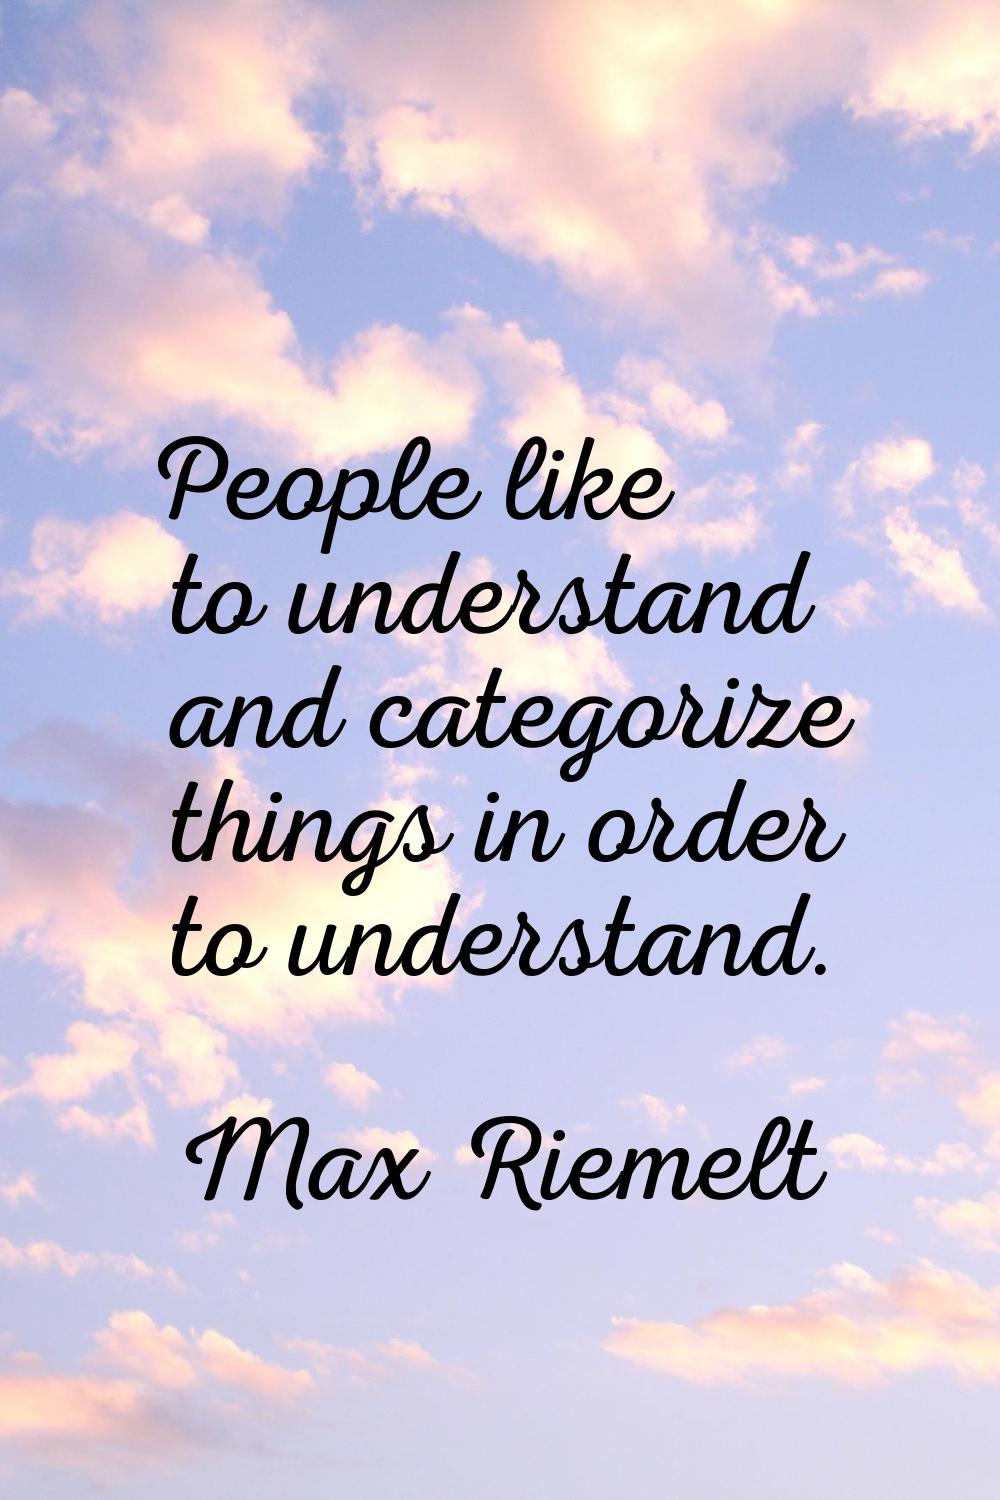 People like to understand and categorize things in order to understand.